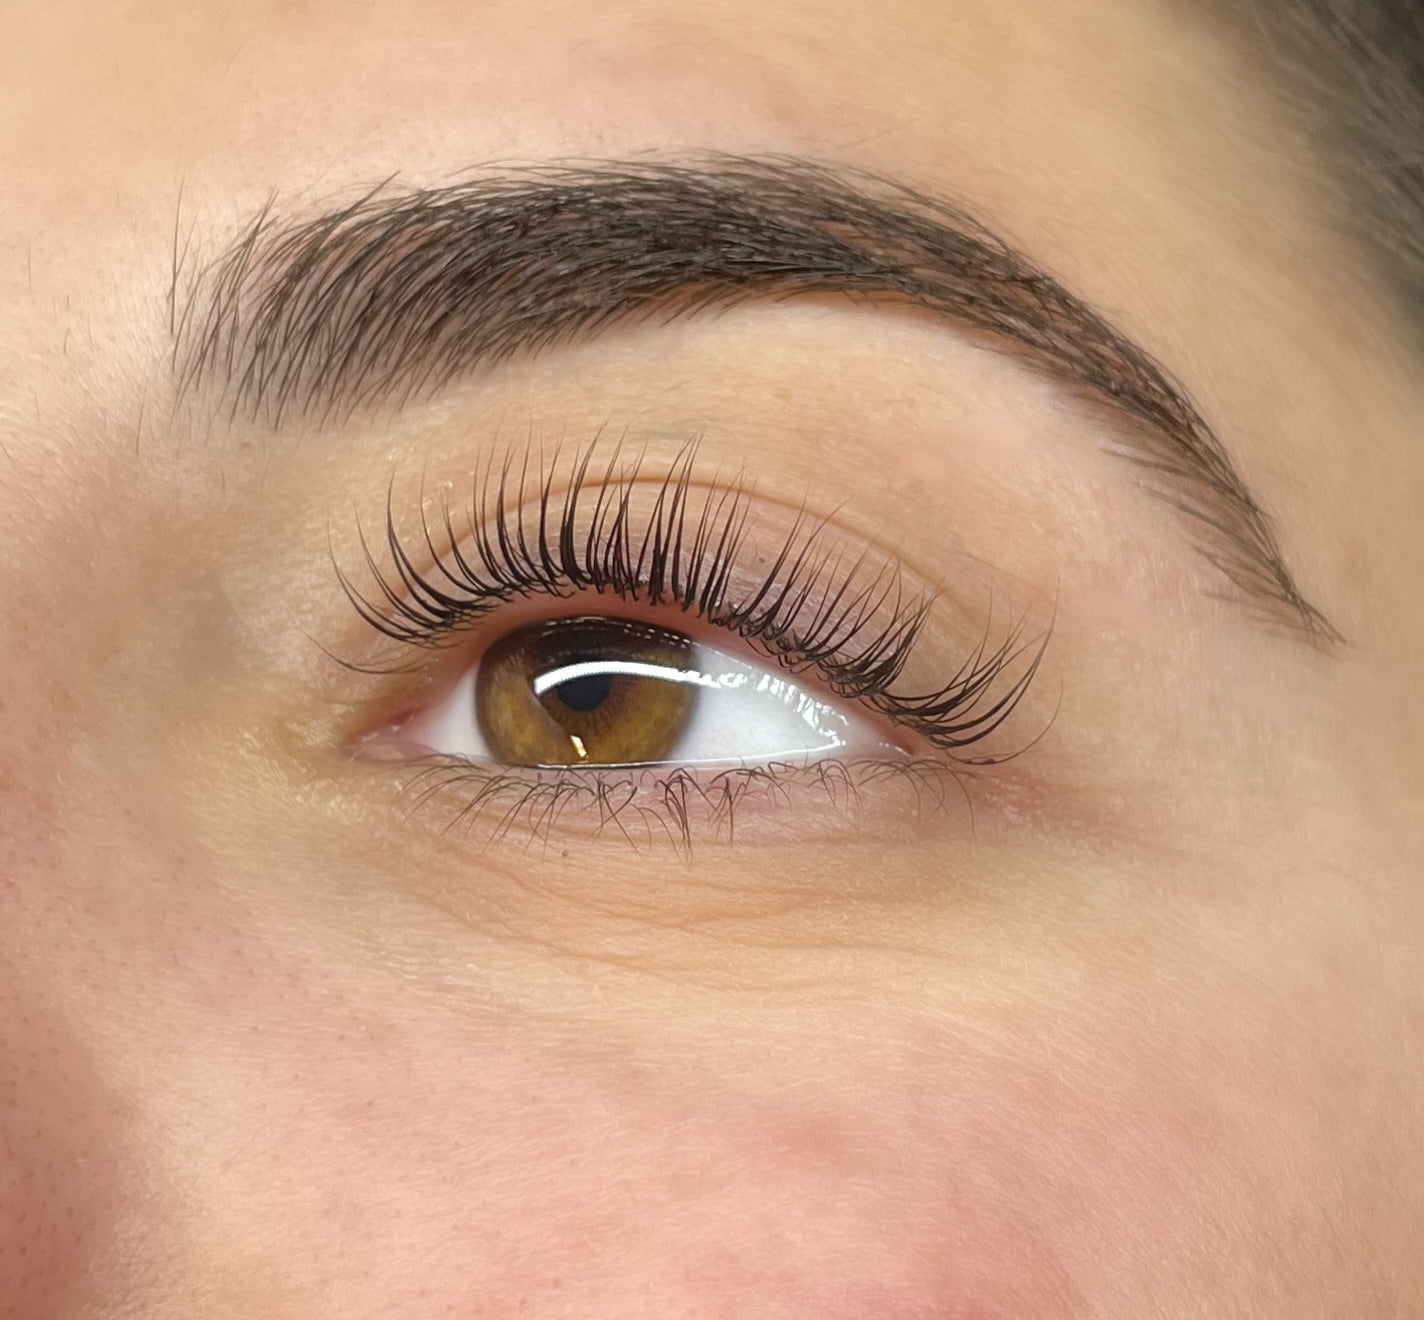 The Lash Den Los Angeles: eyelash extensions, lash lifting, brow lamination, and training and education for lash artists, estheticians, and cosmetologists 